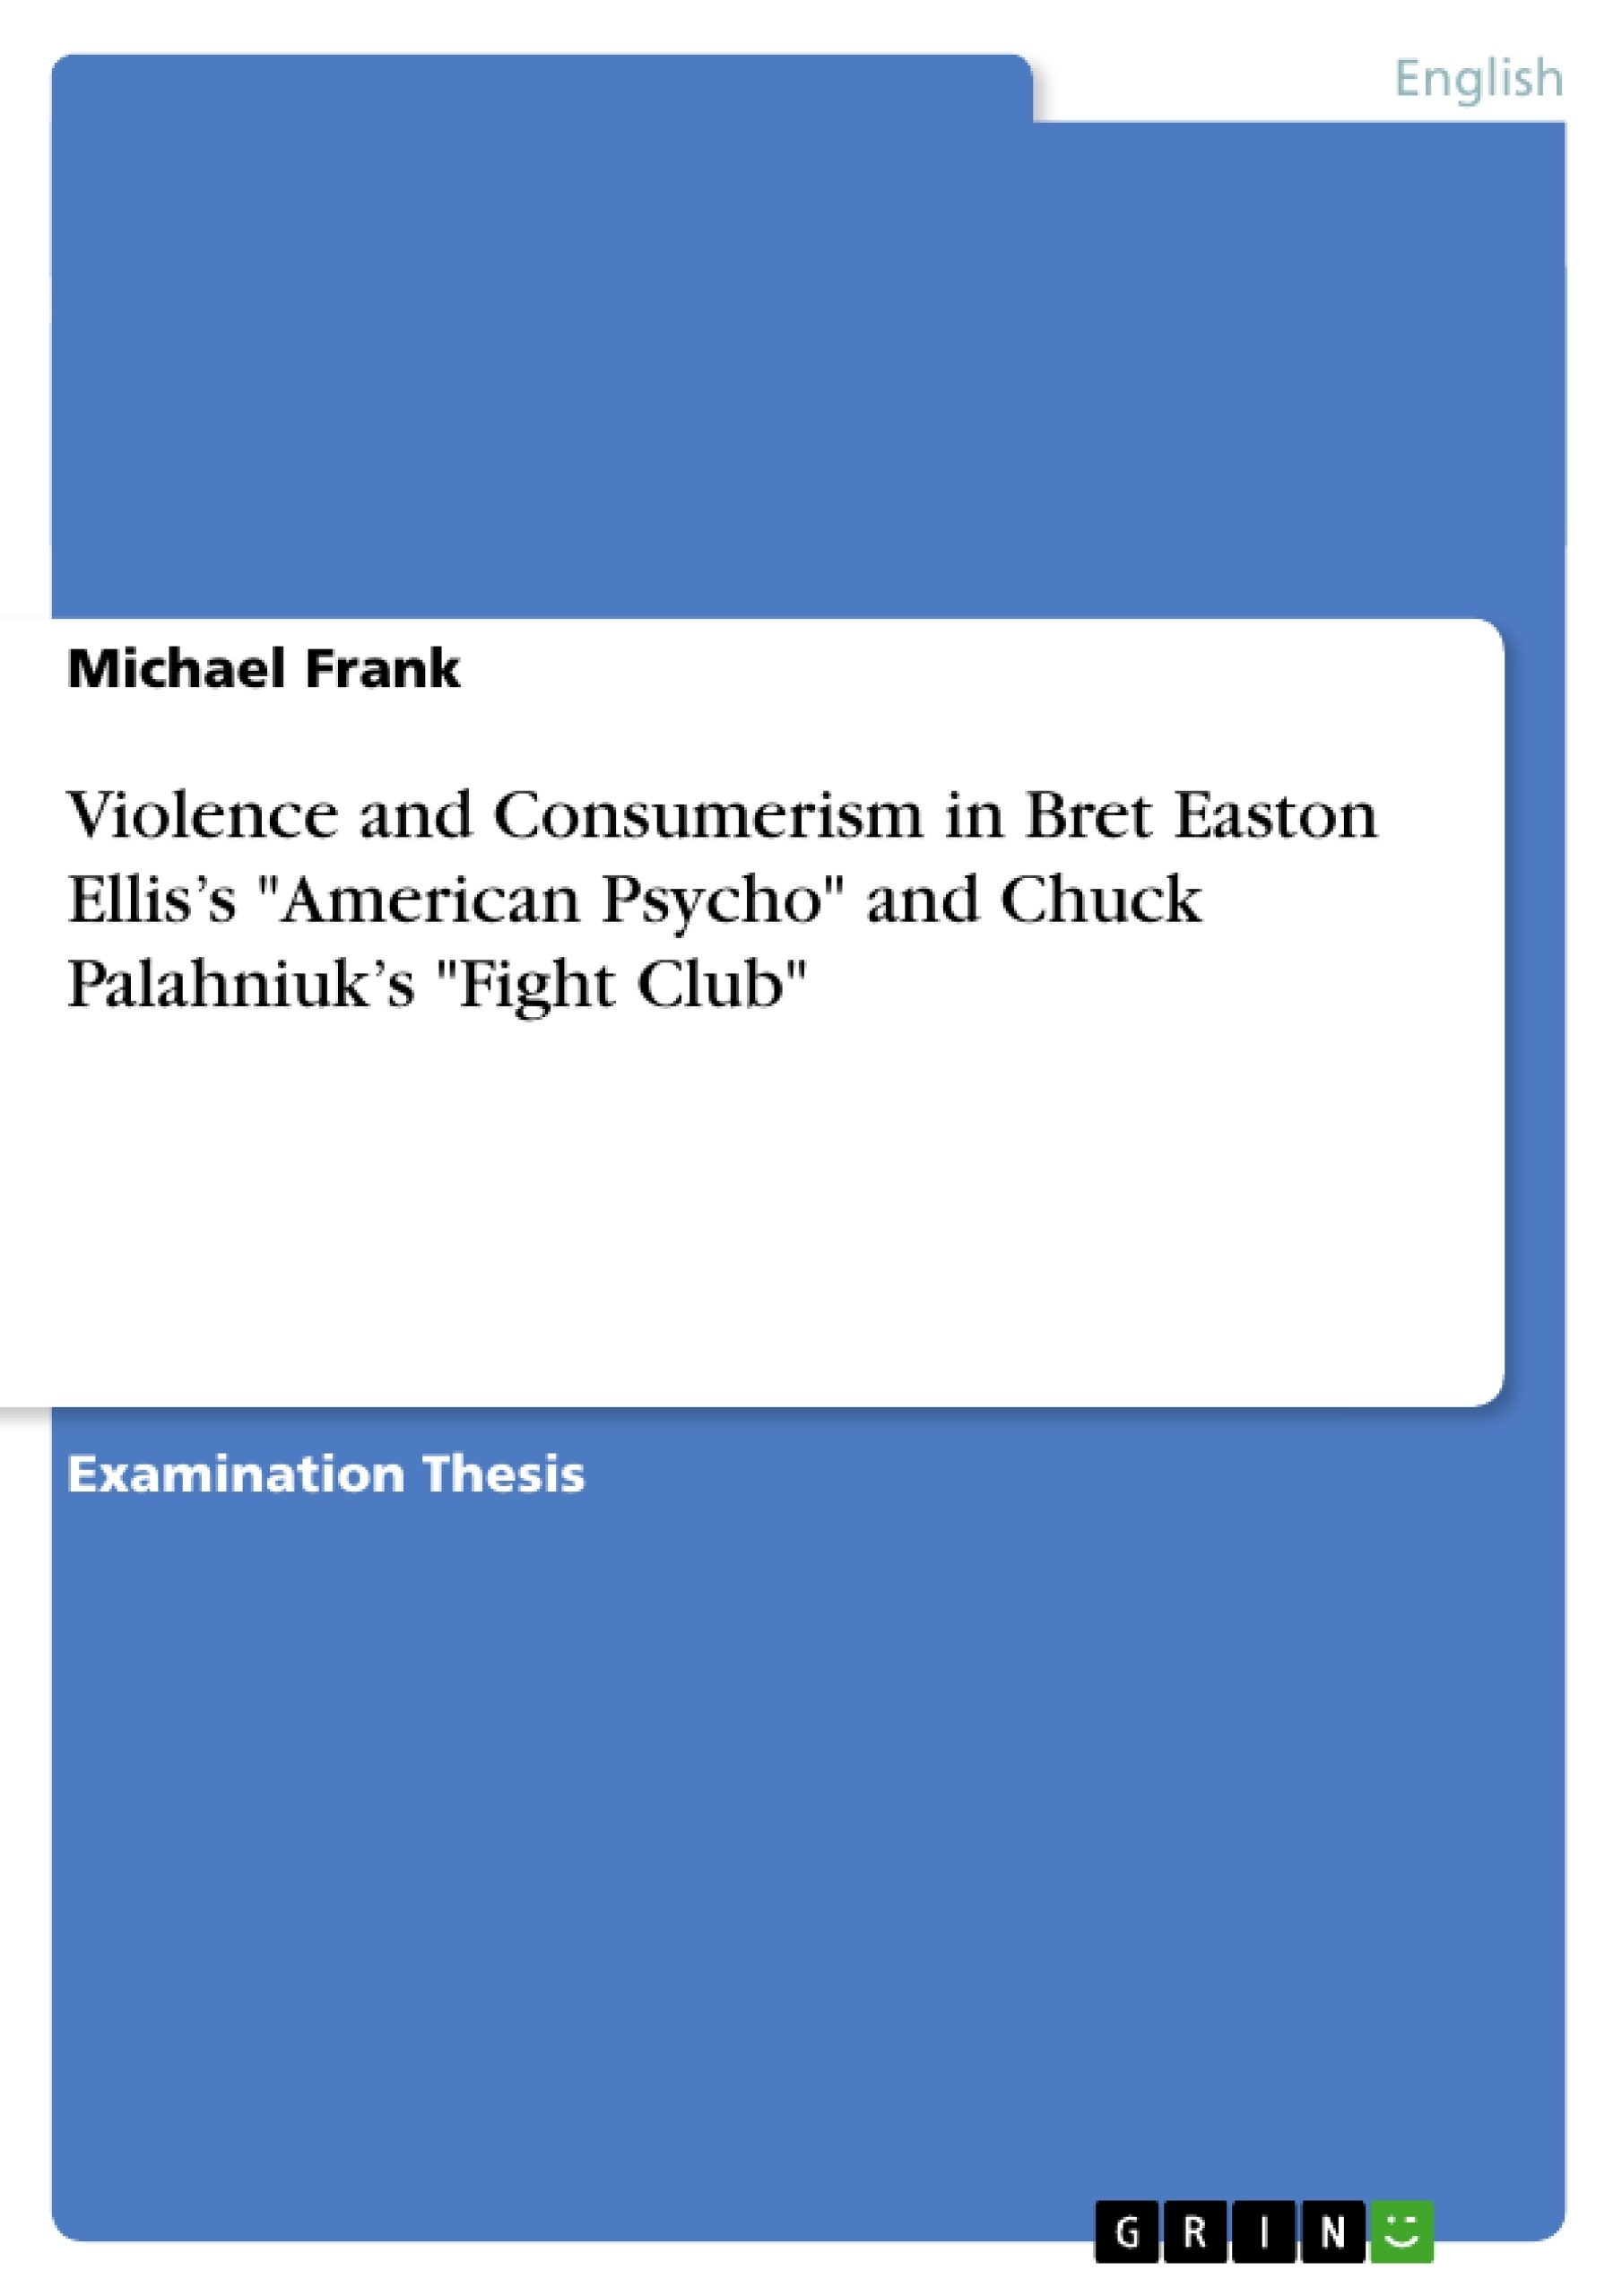 Titel: Violence and Consumerism in Bret Easton Ellis’s "American Psycho" and Chuck Palahniuk’s "Fight Club"